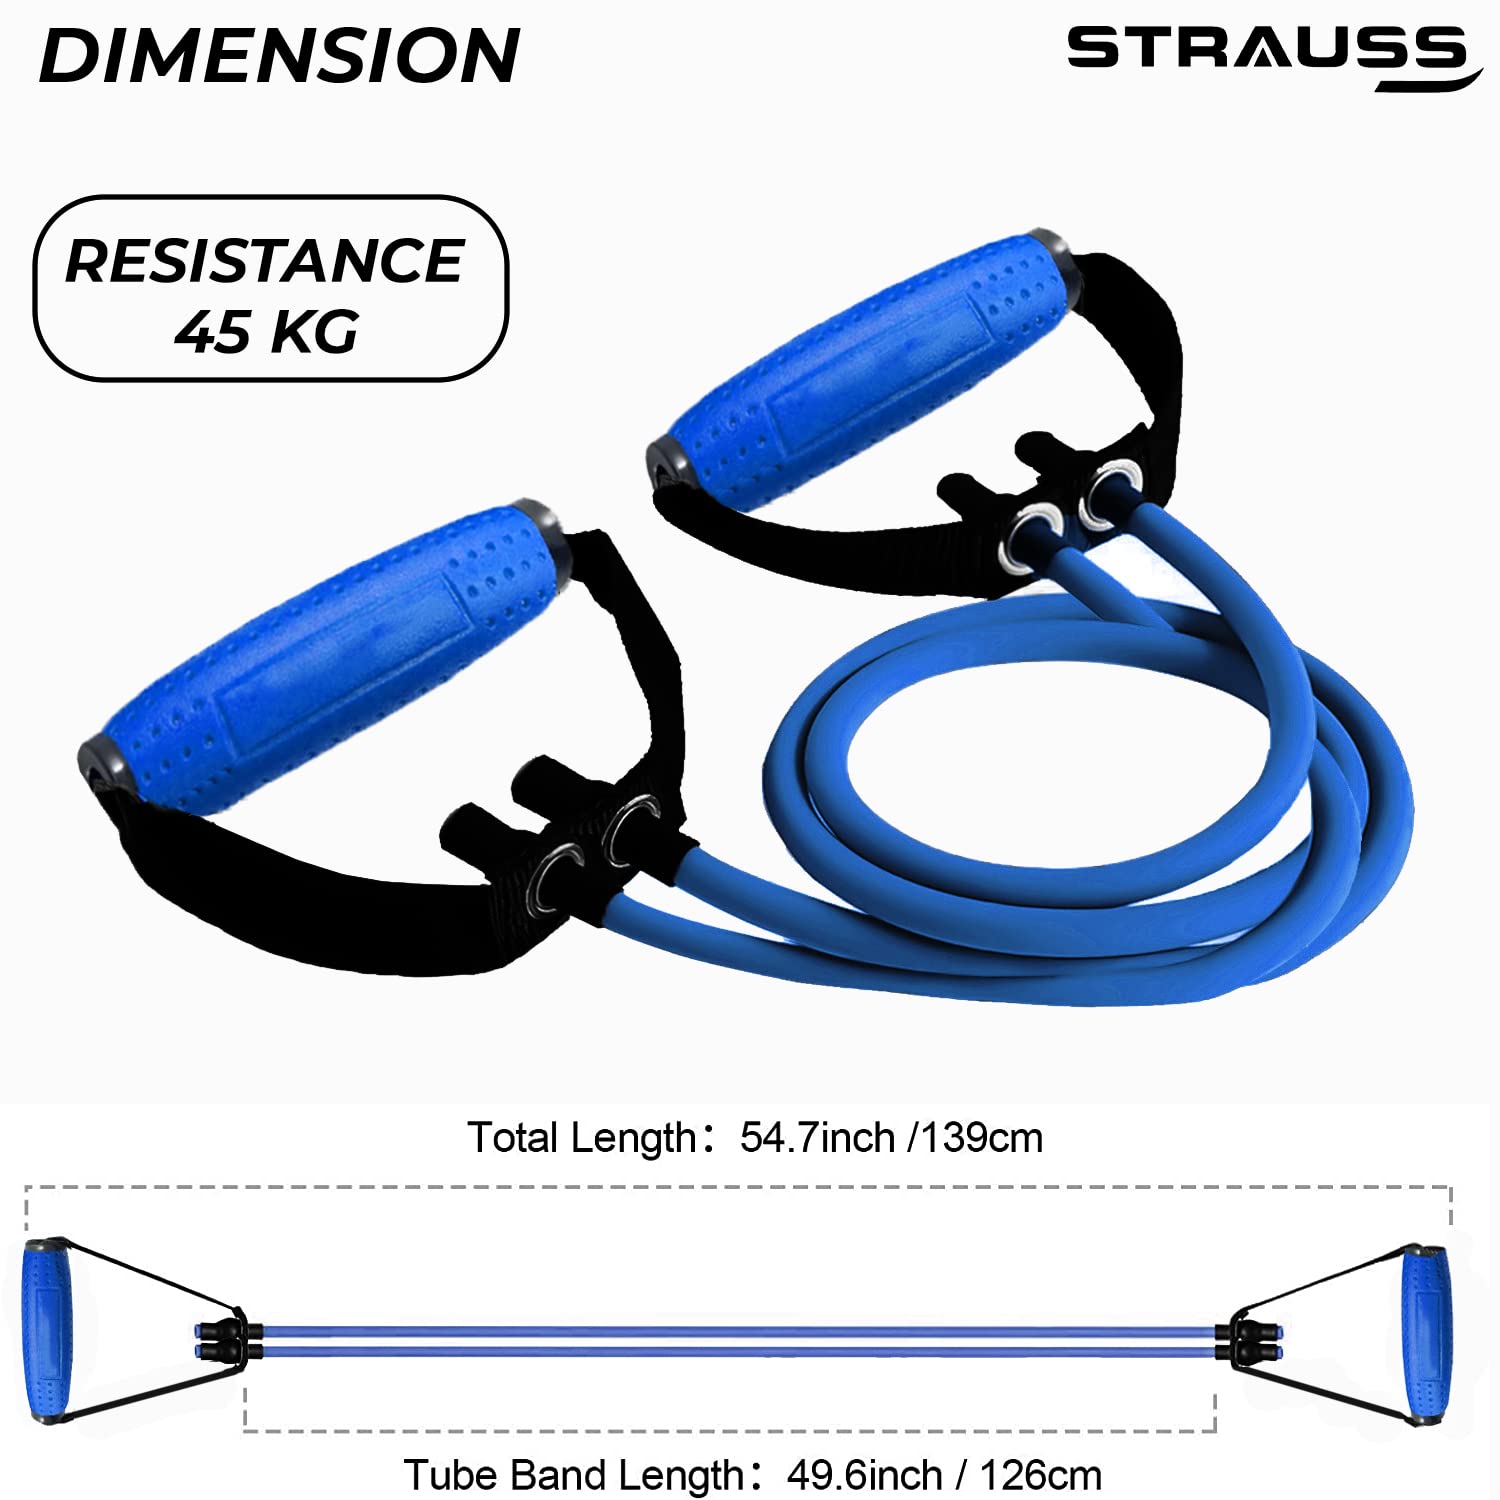 Strauss Double Resistance Tube with PVC Handles, Door Knob & Carry Bag, 45 Kg, (Blue)